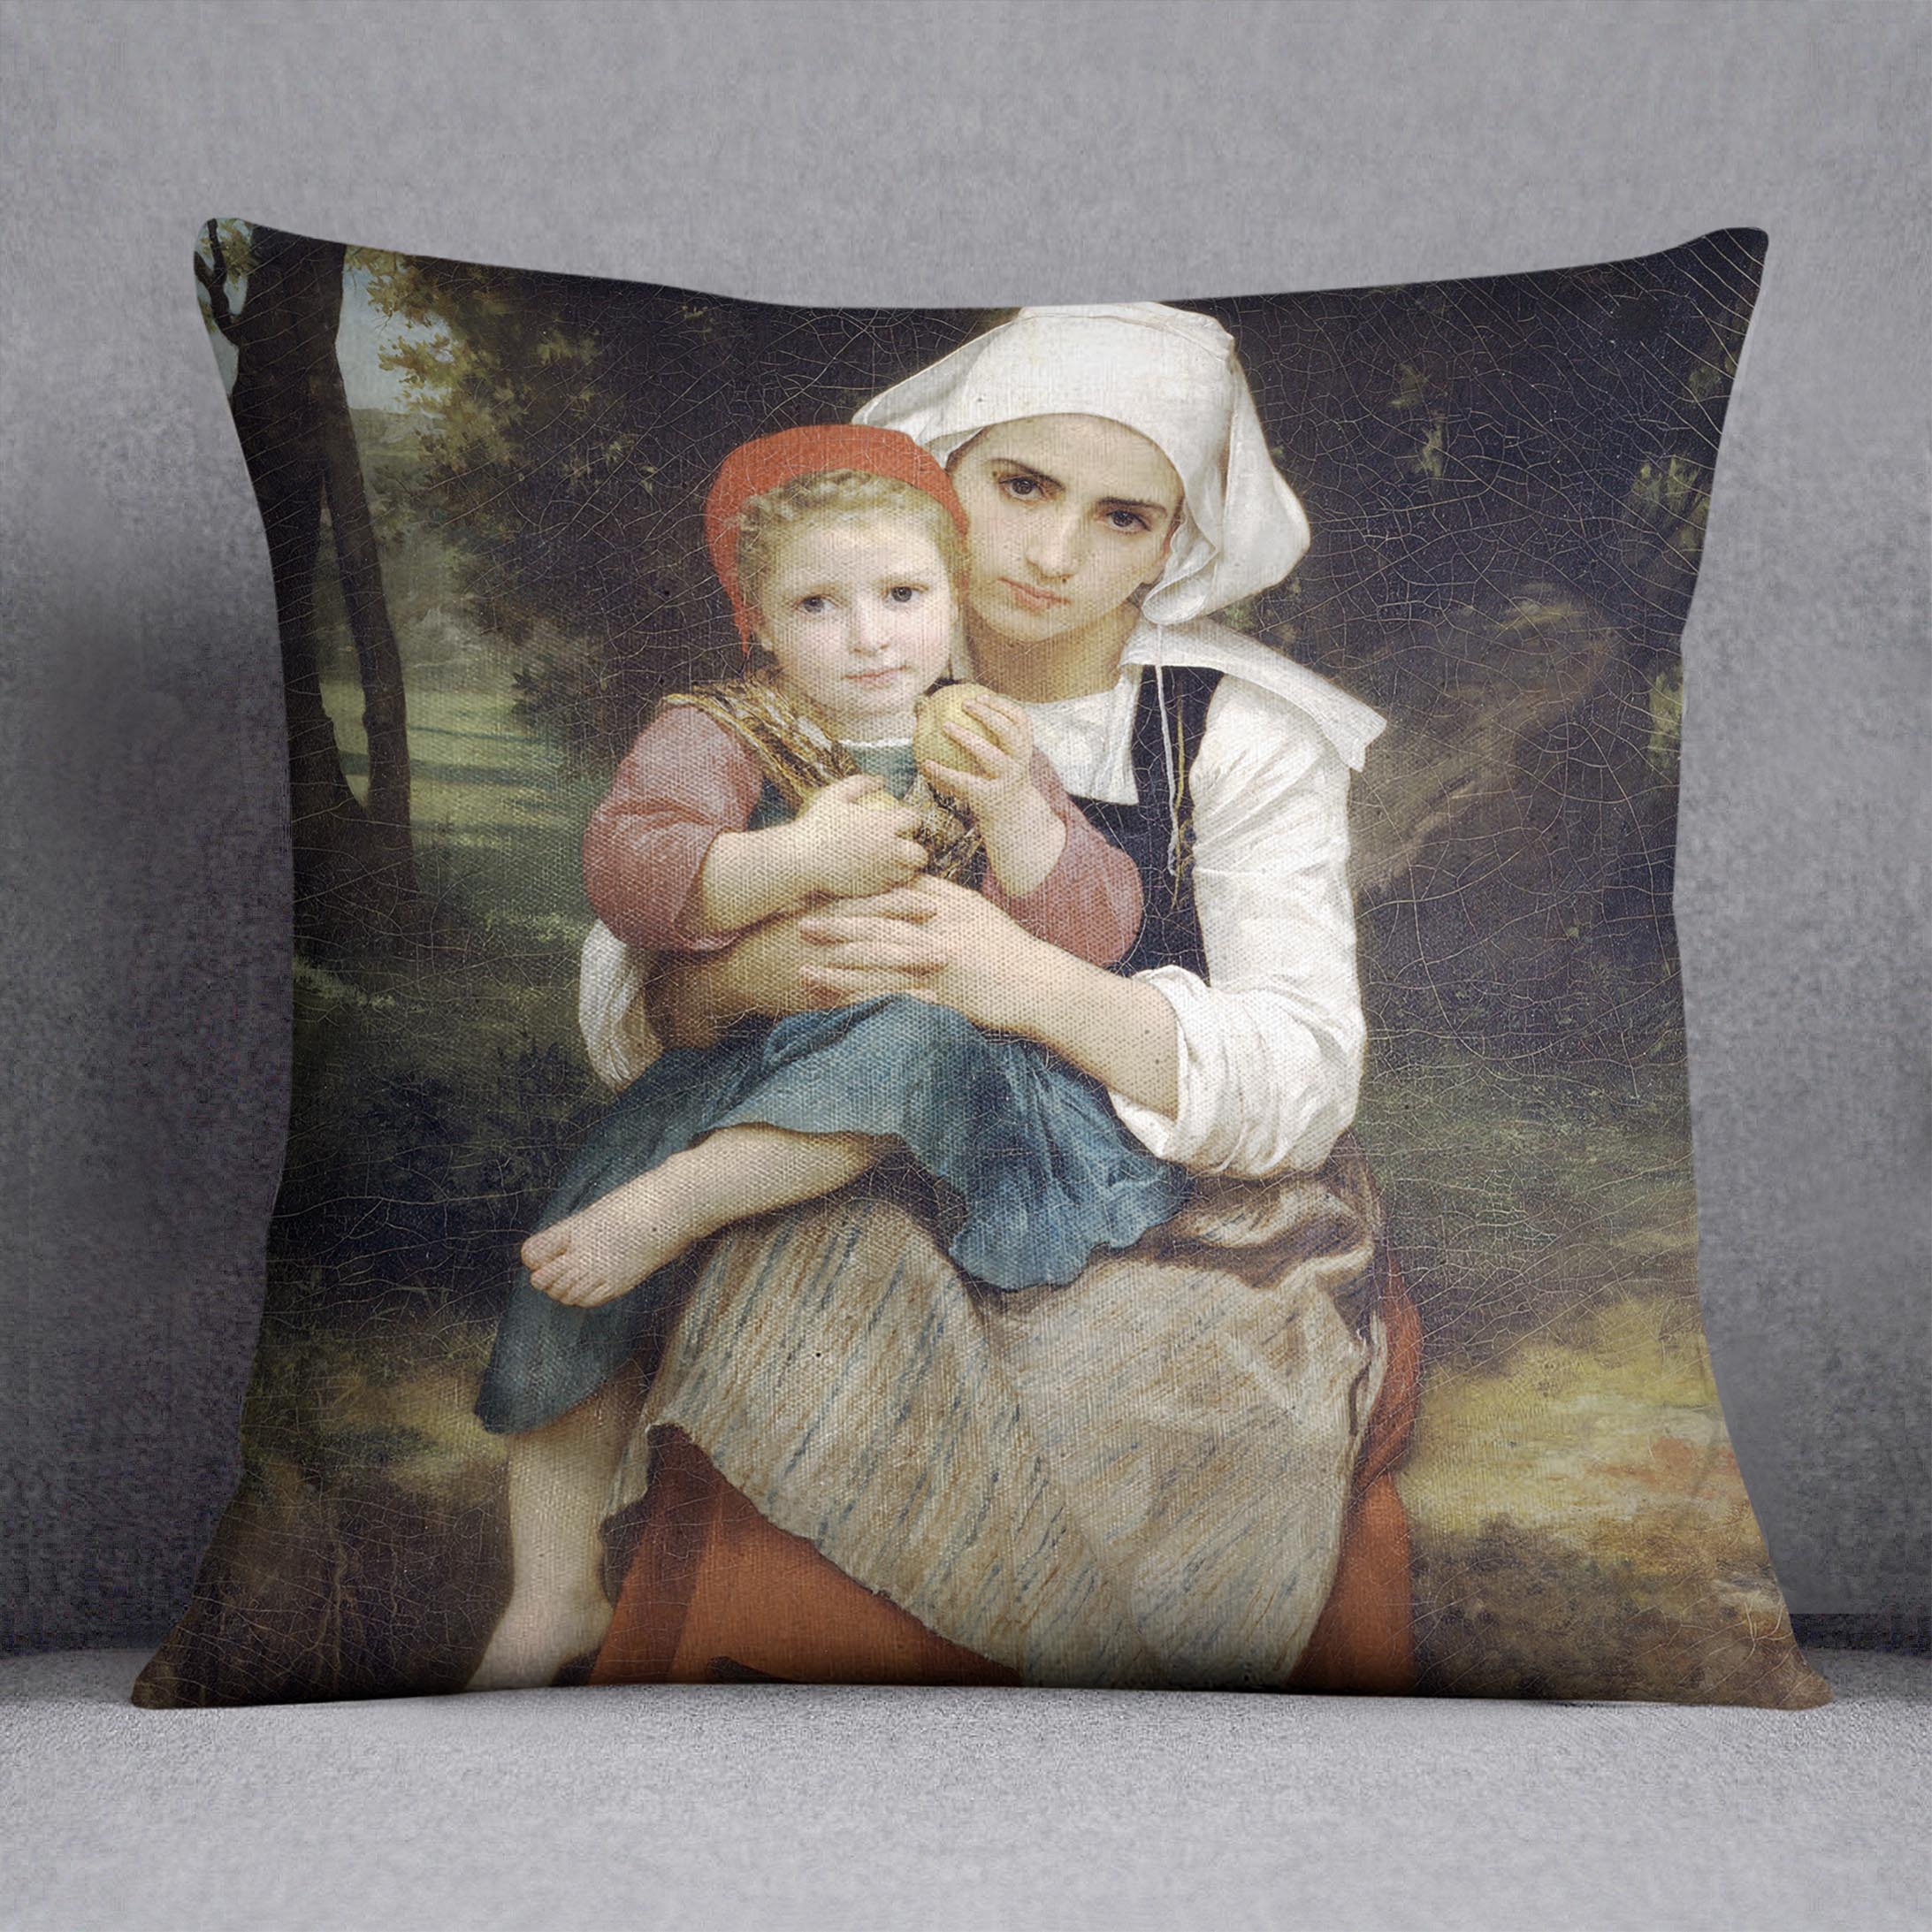 Breton Brother and Sister By Bouguereau Cushion